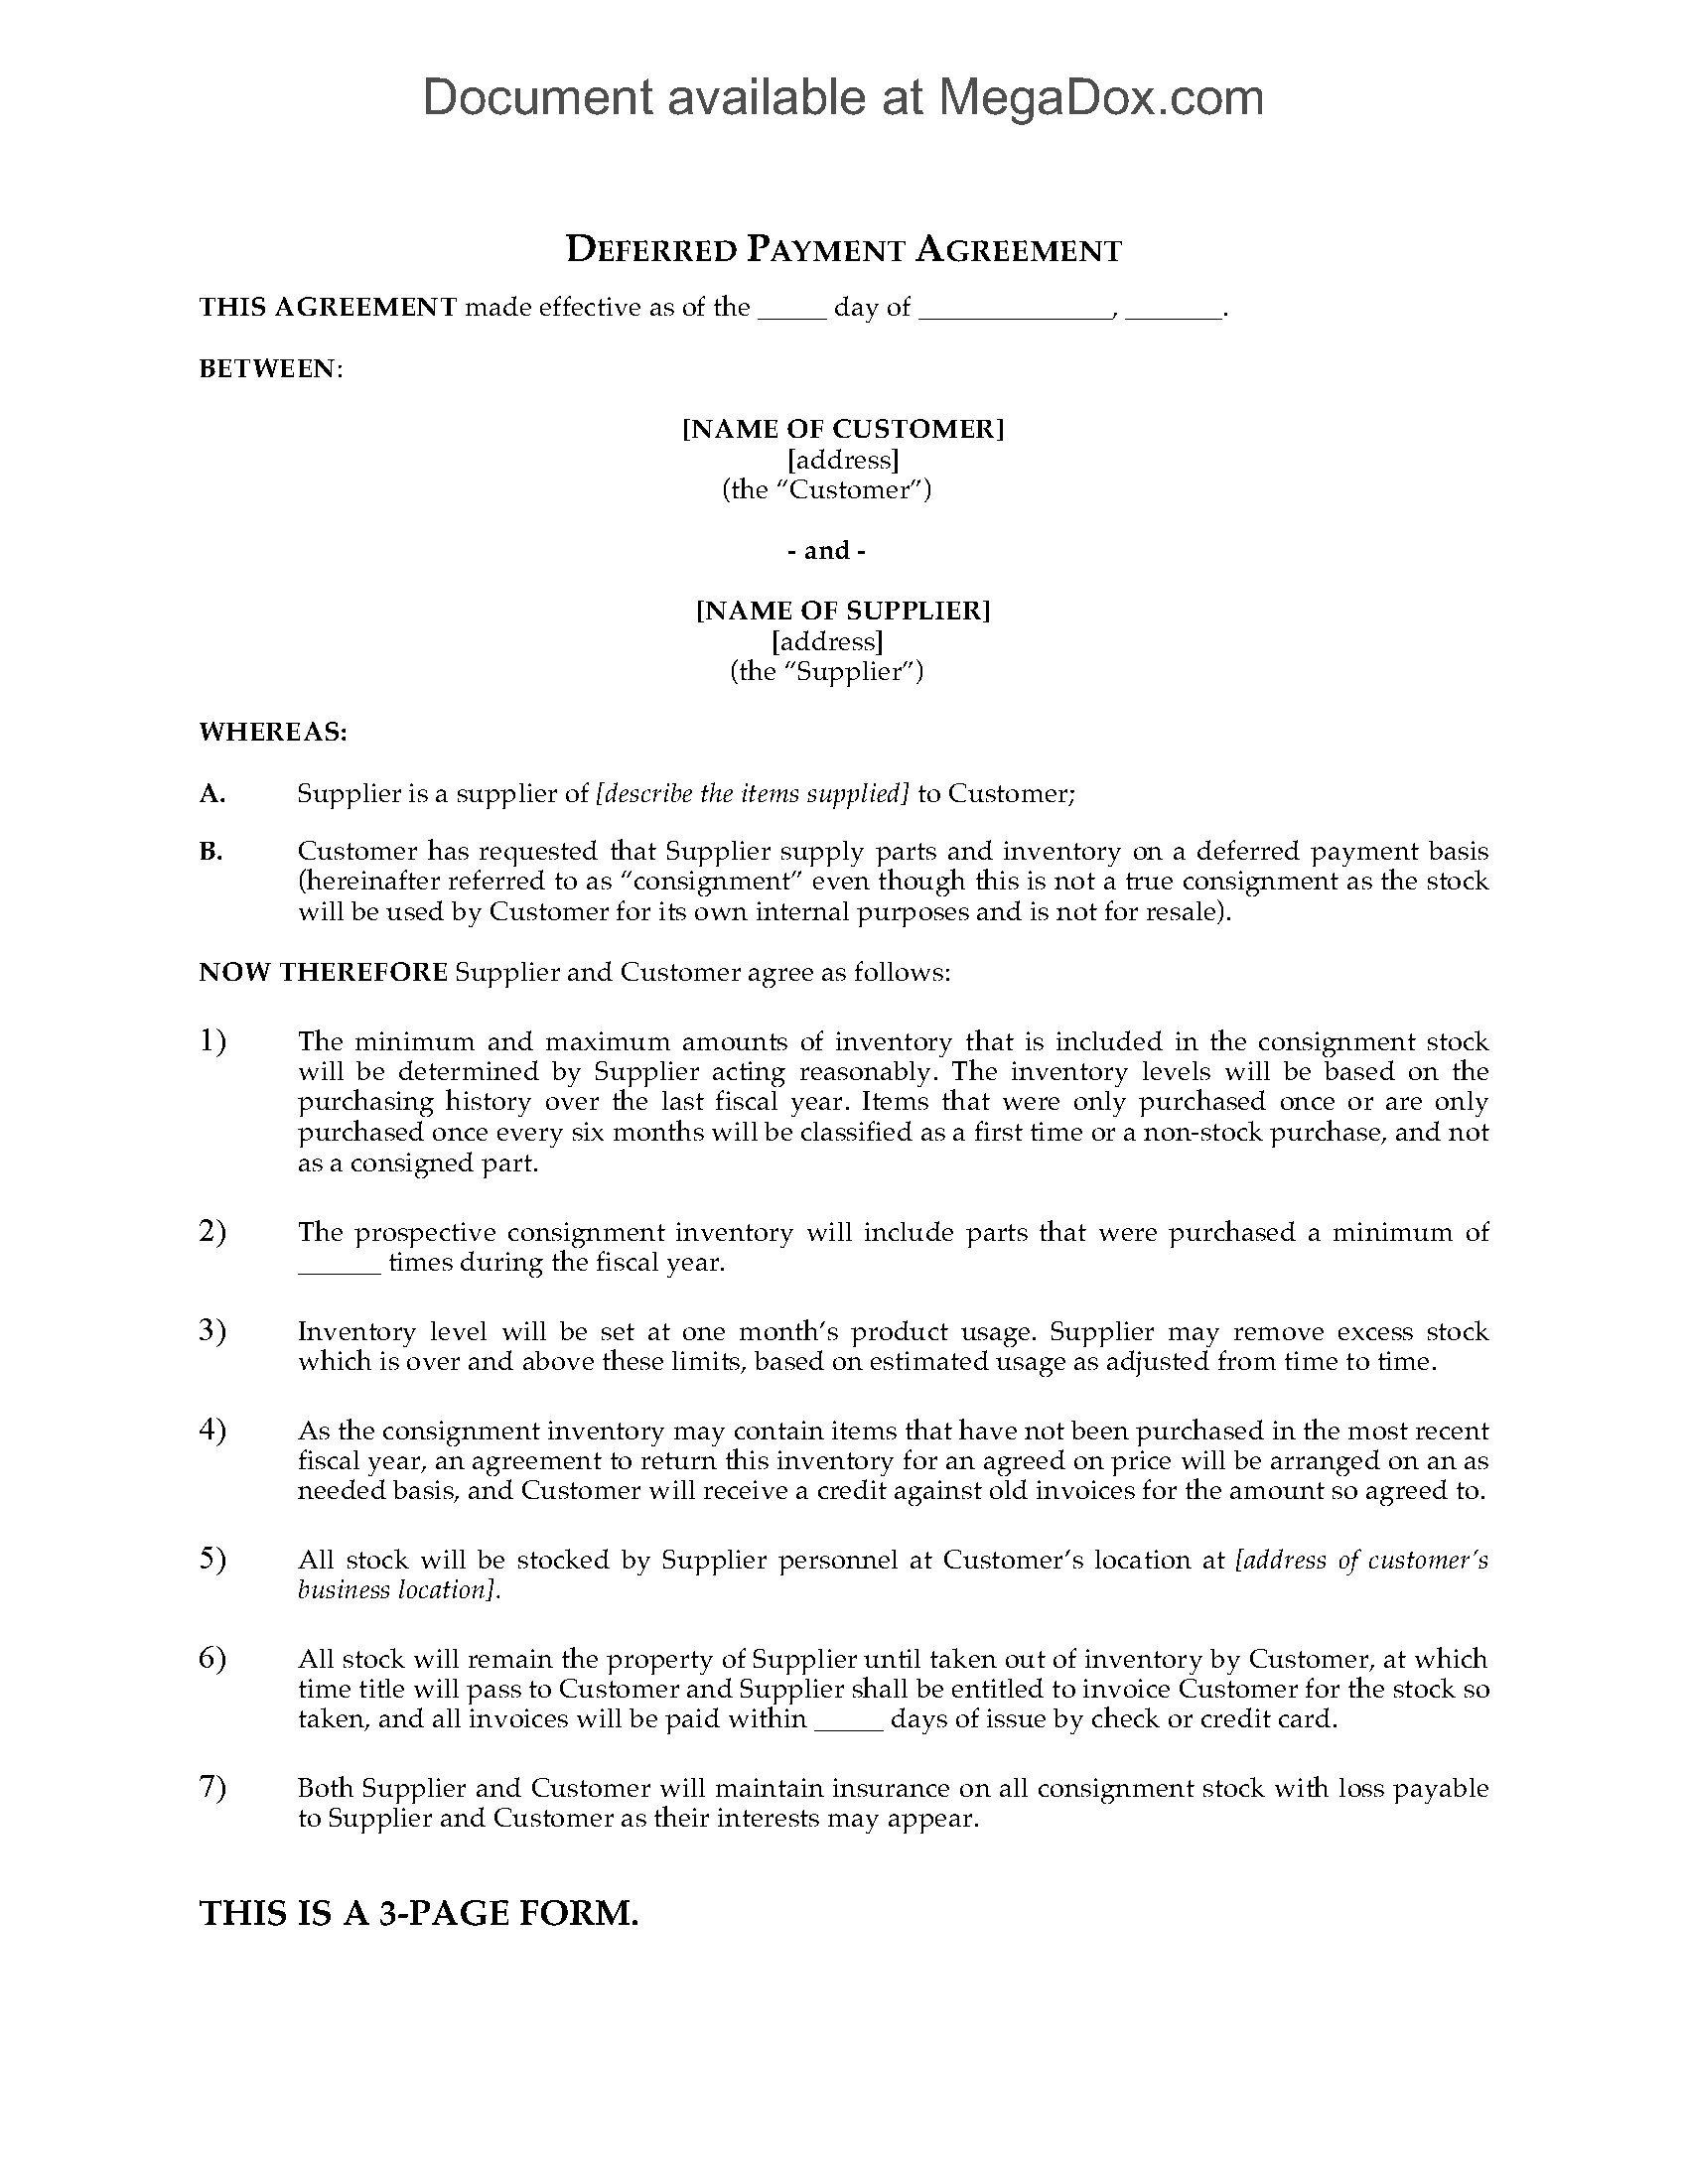 Deferred Payment Contract Template Deferred Payment Agreement Legal forms and Business